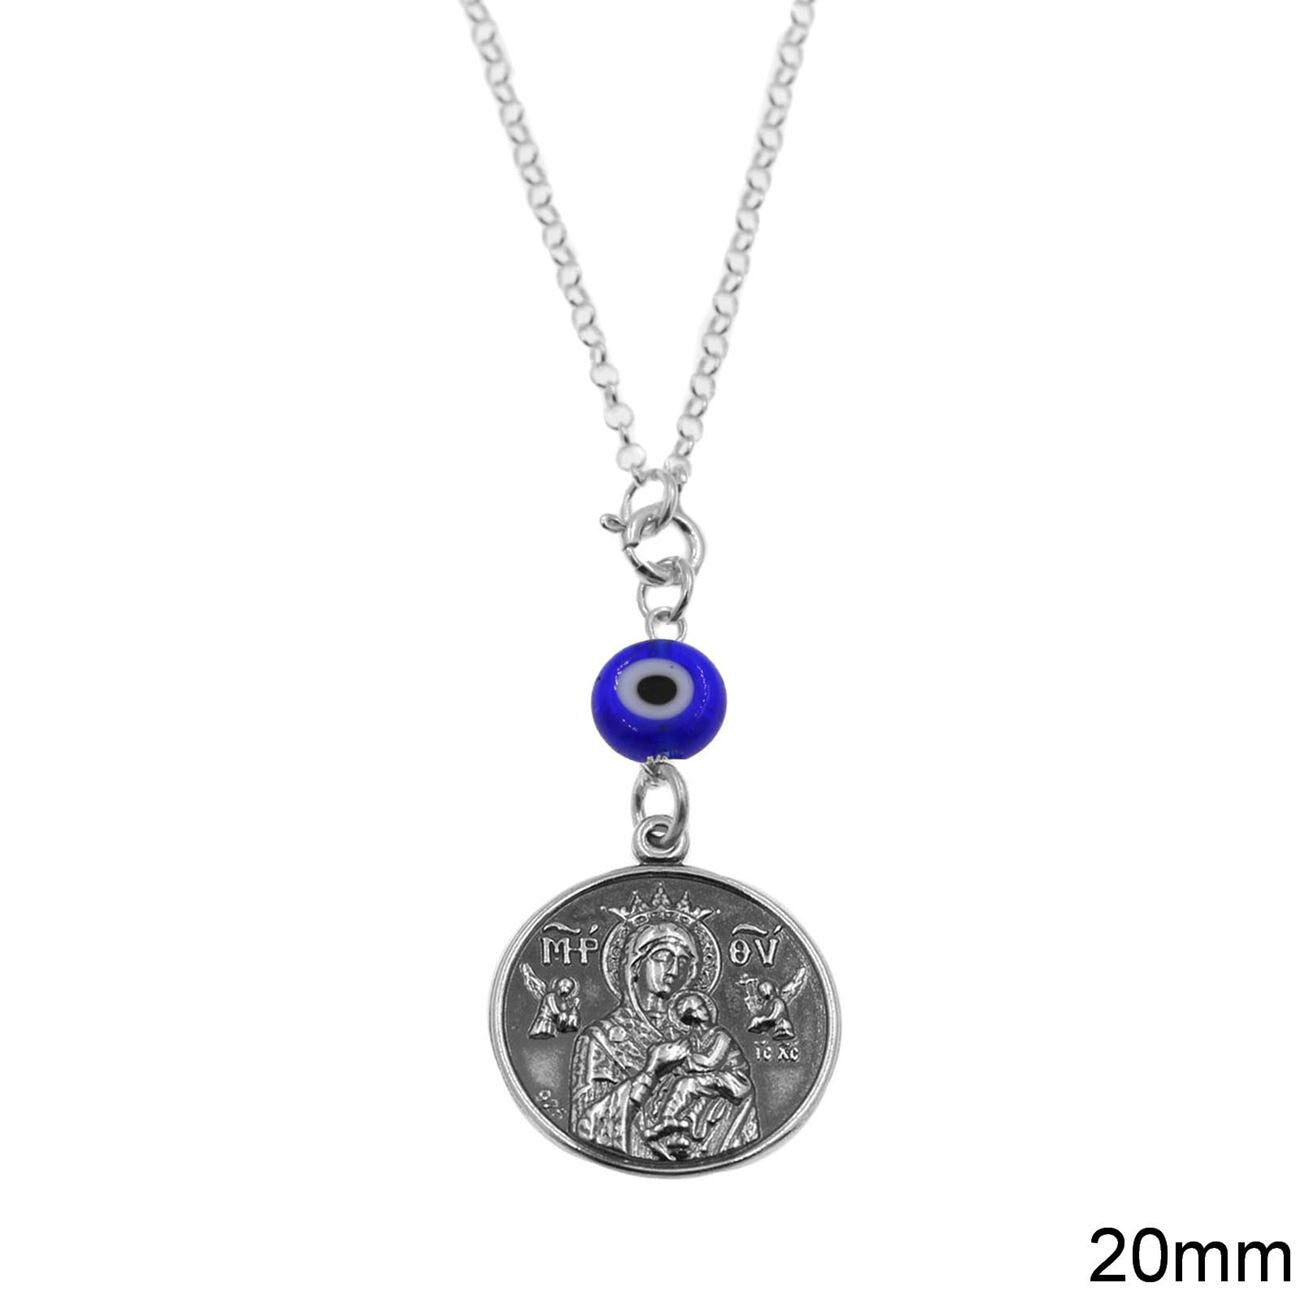 TheHolyArt Virgin Mary Pendant with Evil Eye Religious Necklace Car Mirror Accessory Christian Jewelry Mother Mary 925K Sterling Silver Unisex gift